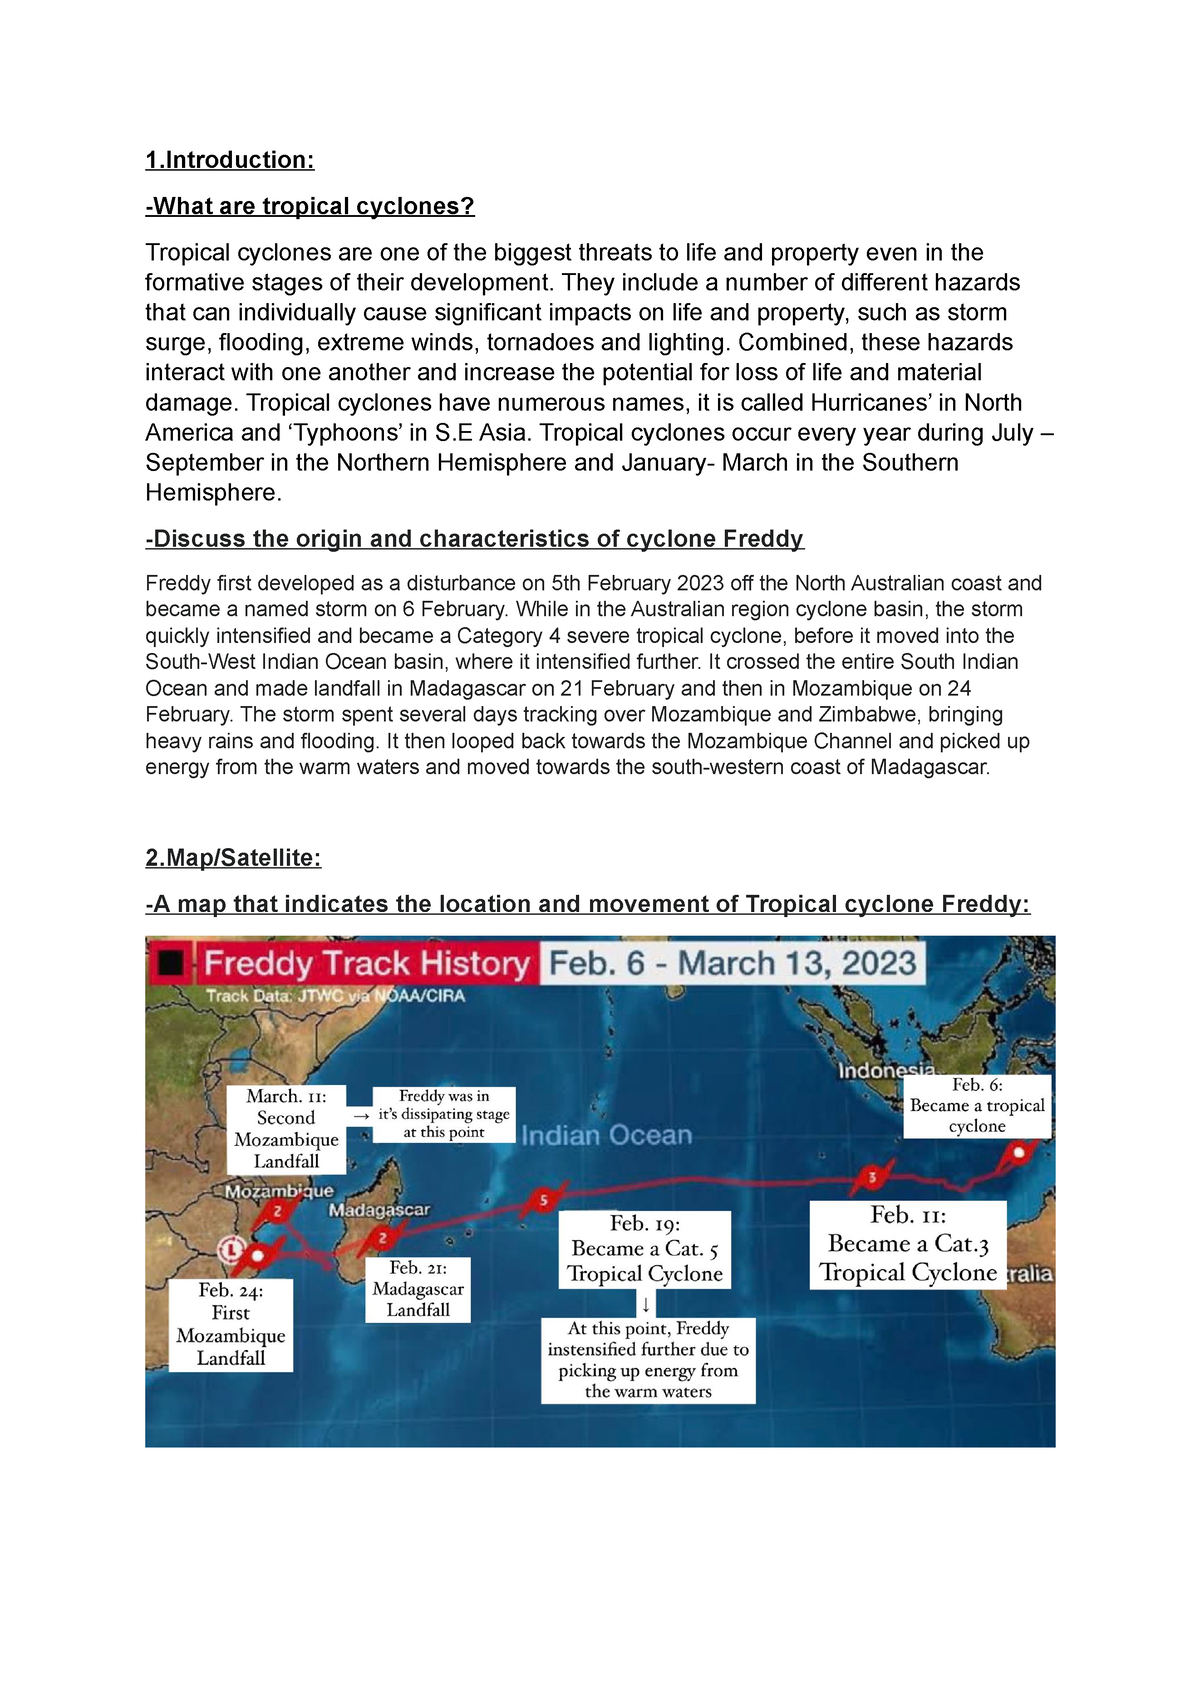 grade 12 geography research project 2021 memorandum about tropical cyclone